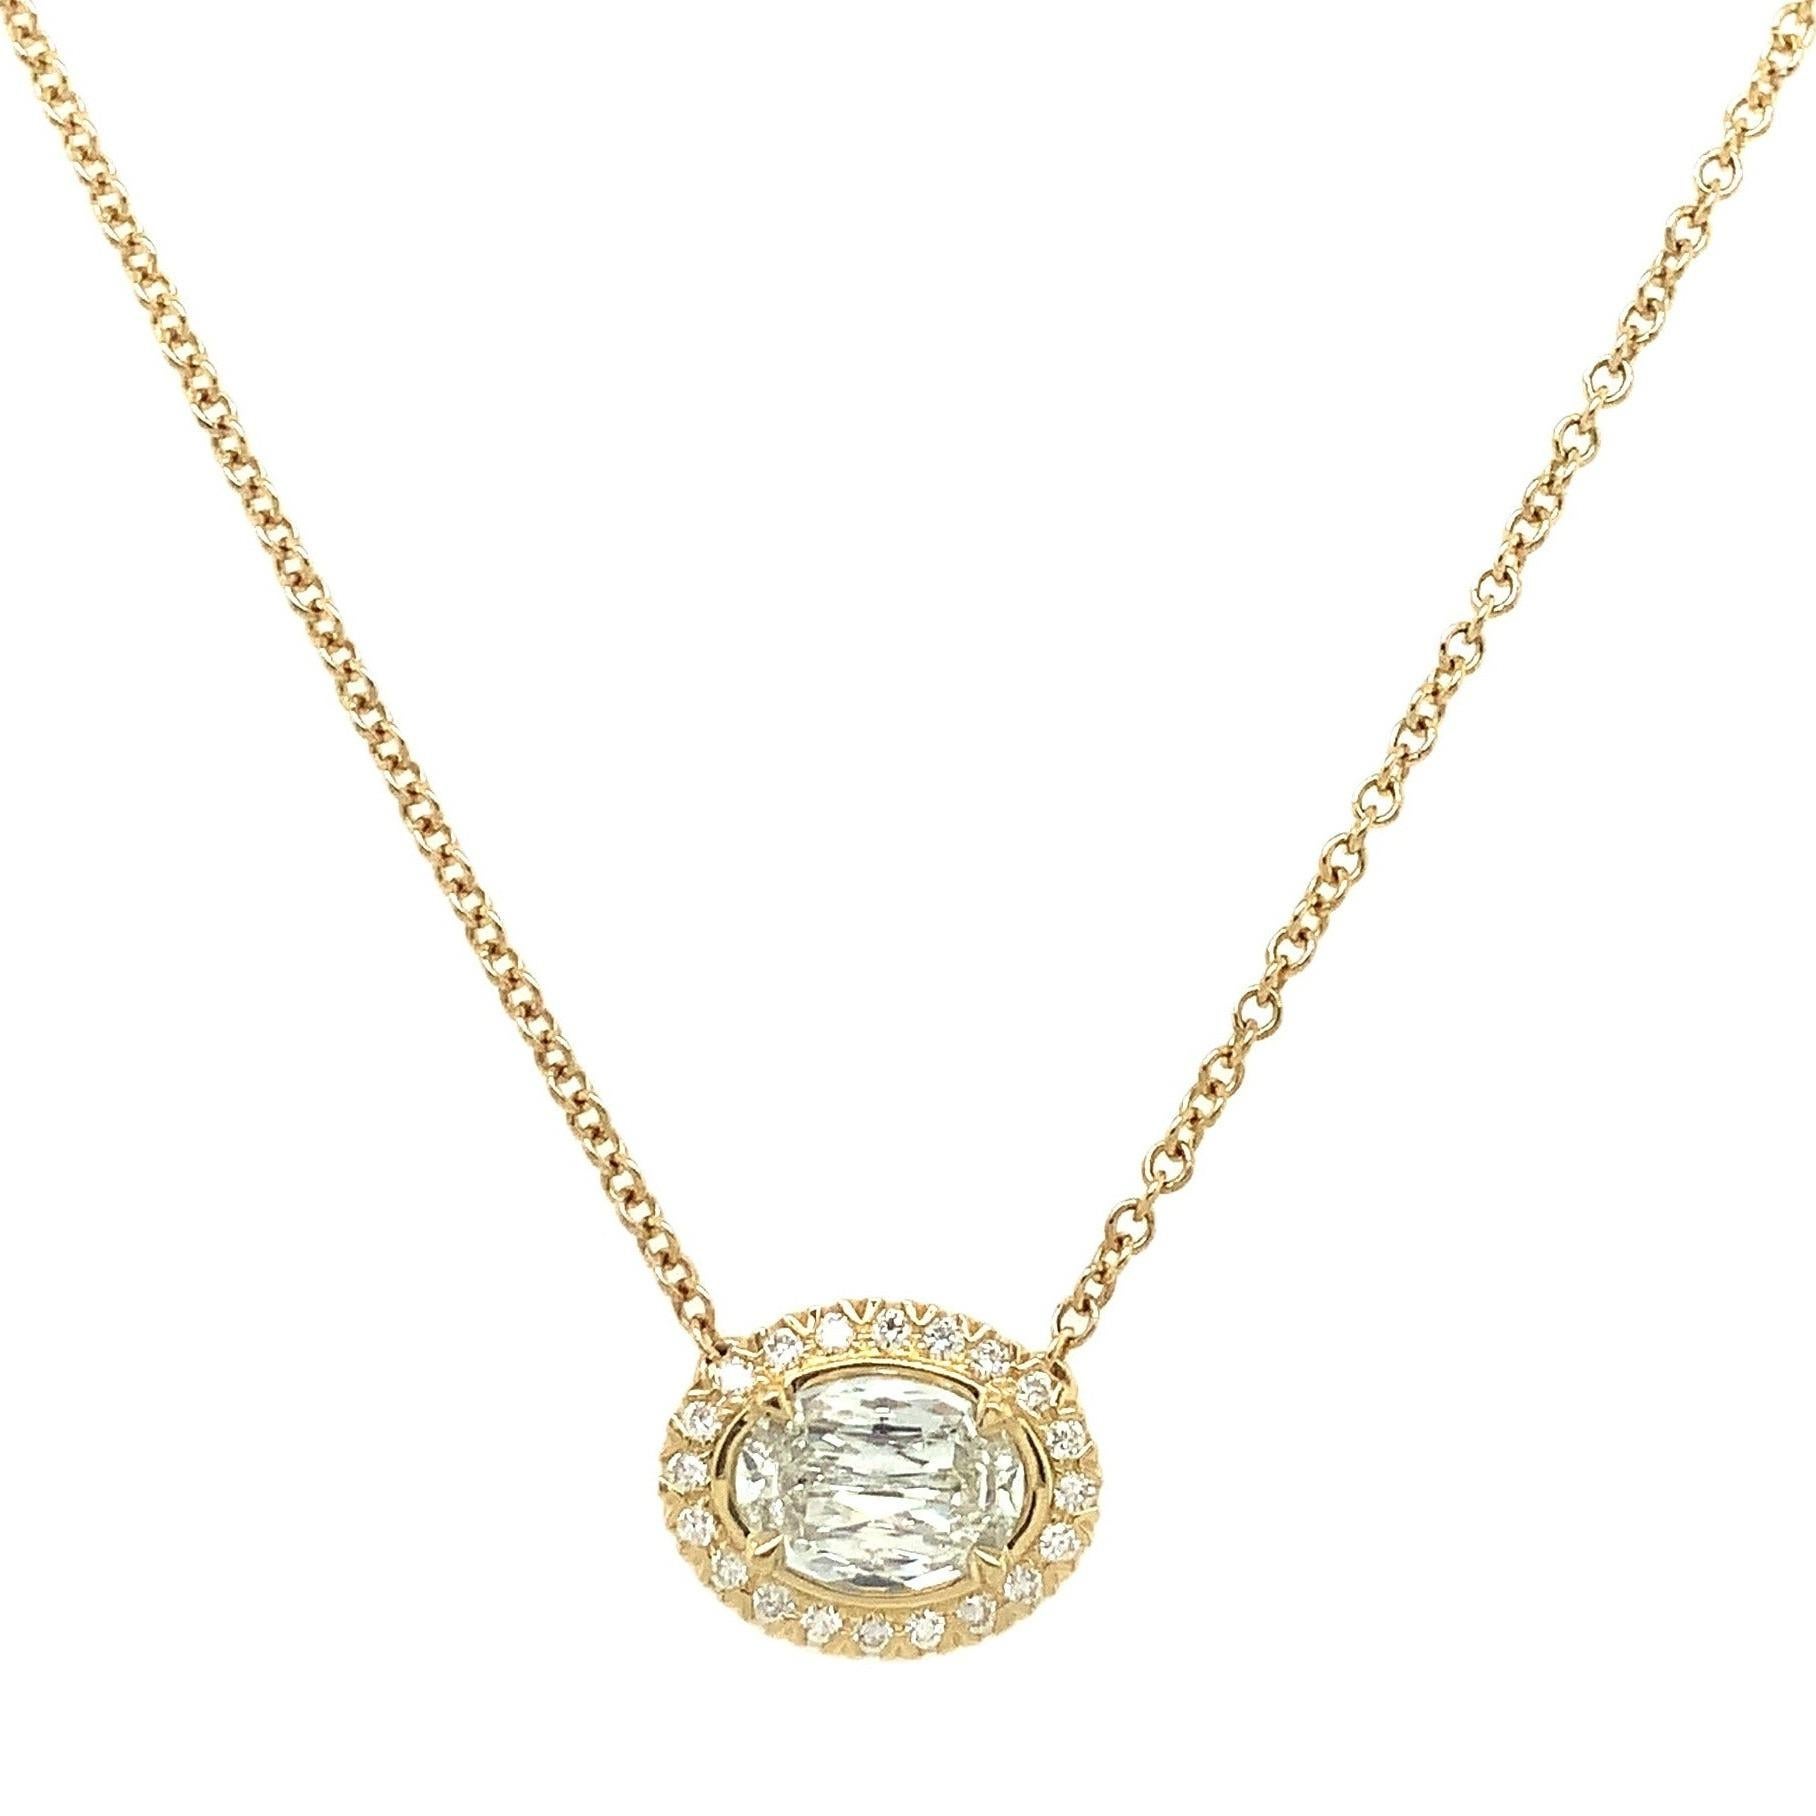 This elegant Pendant from Christopher Designs features a 0.56 ct. L'Amour Oval Crisscut®  Diamond with a G Color VS Clarity rating and is adorned with 0.08 ct. t.w. of Brilliant Melee, for a total carat weight of 0.64 carats. Crafted from 18 kt